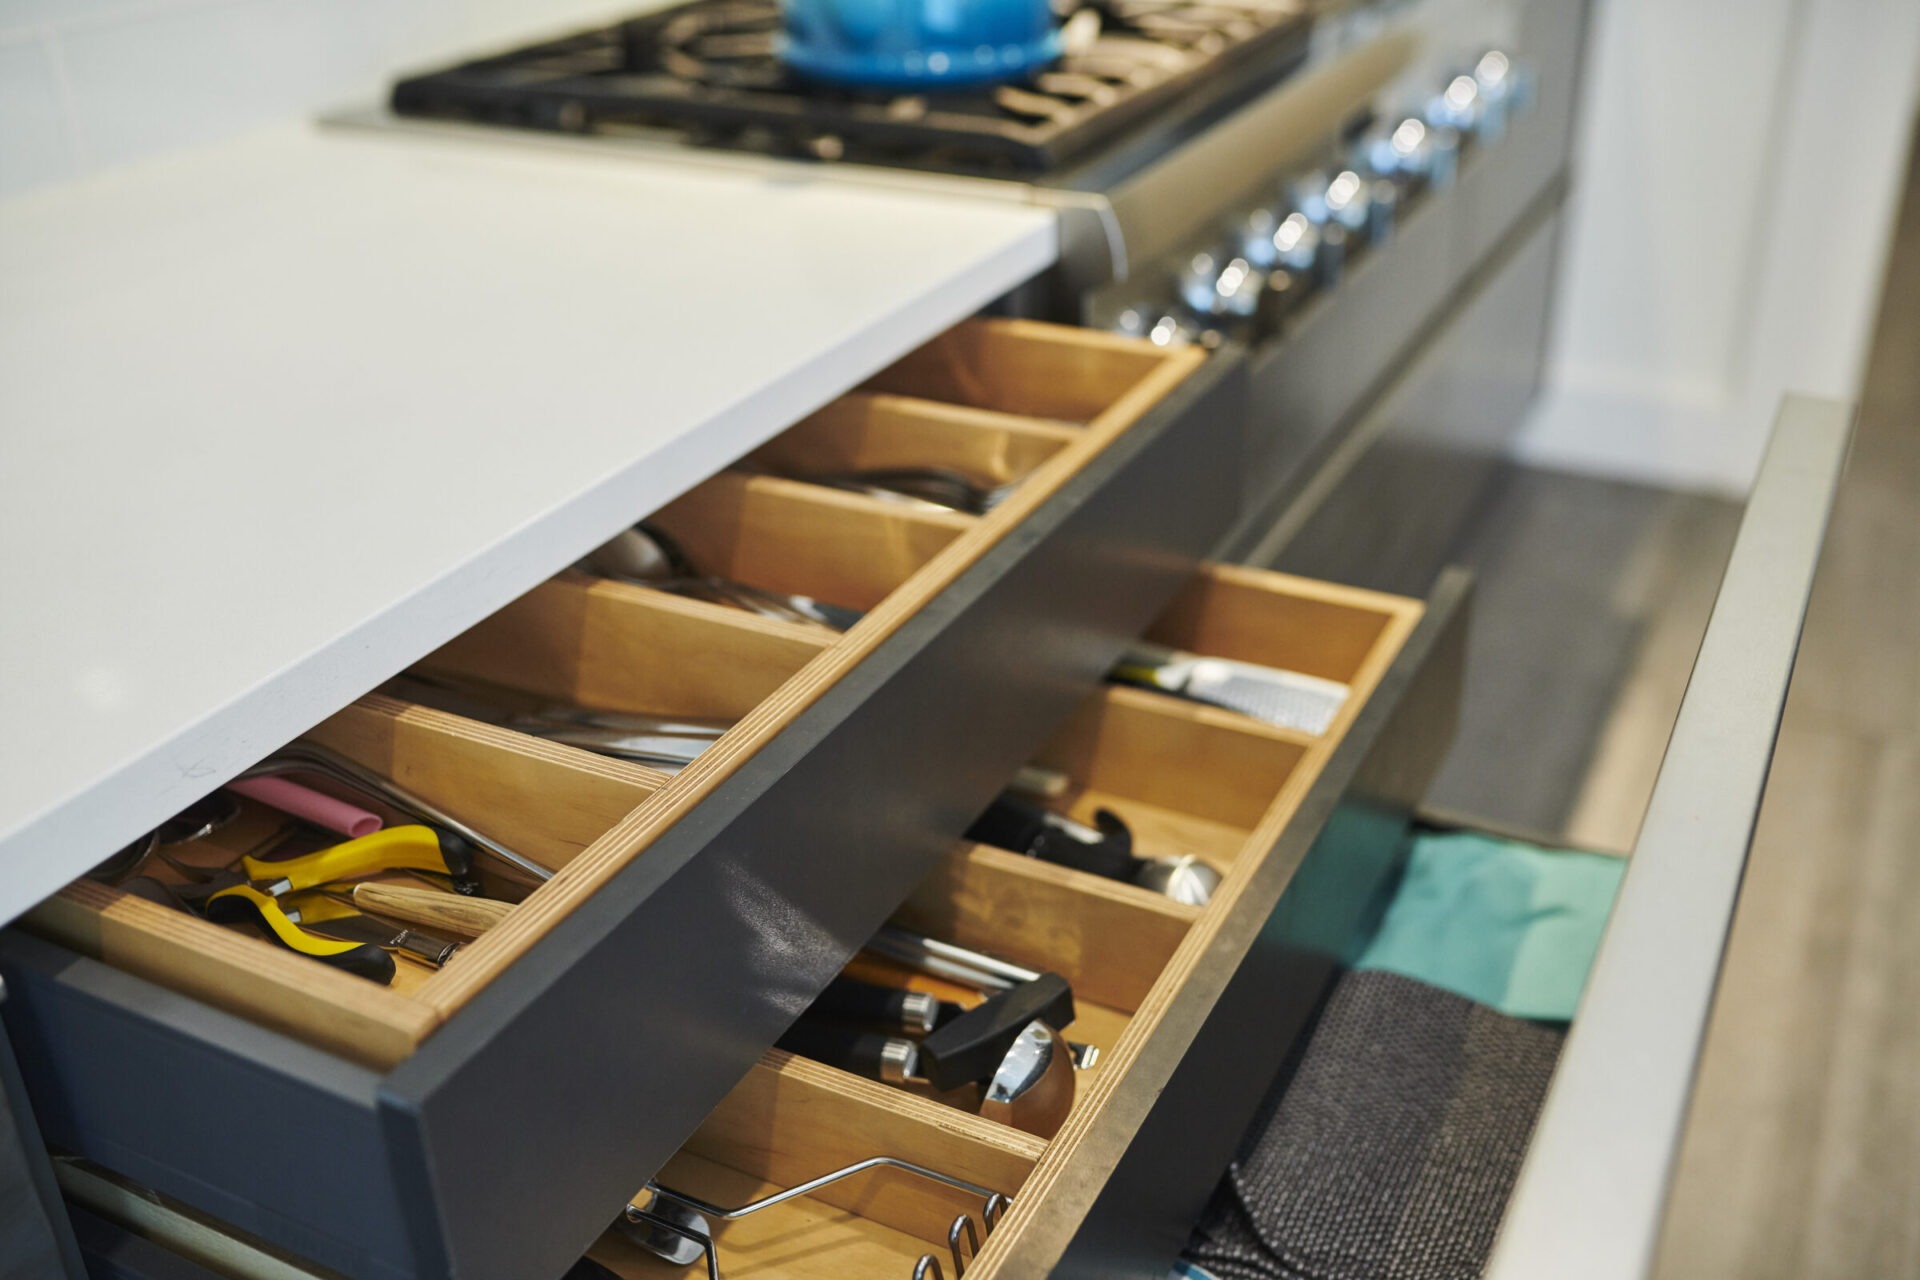 A modern kitchen with a white countertop, open wooden drawers displaying utensils and tools, and a blue pot on a gas stove.